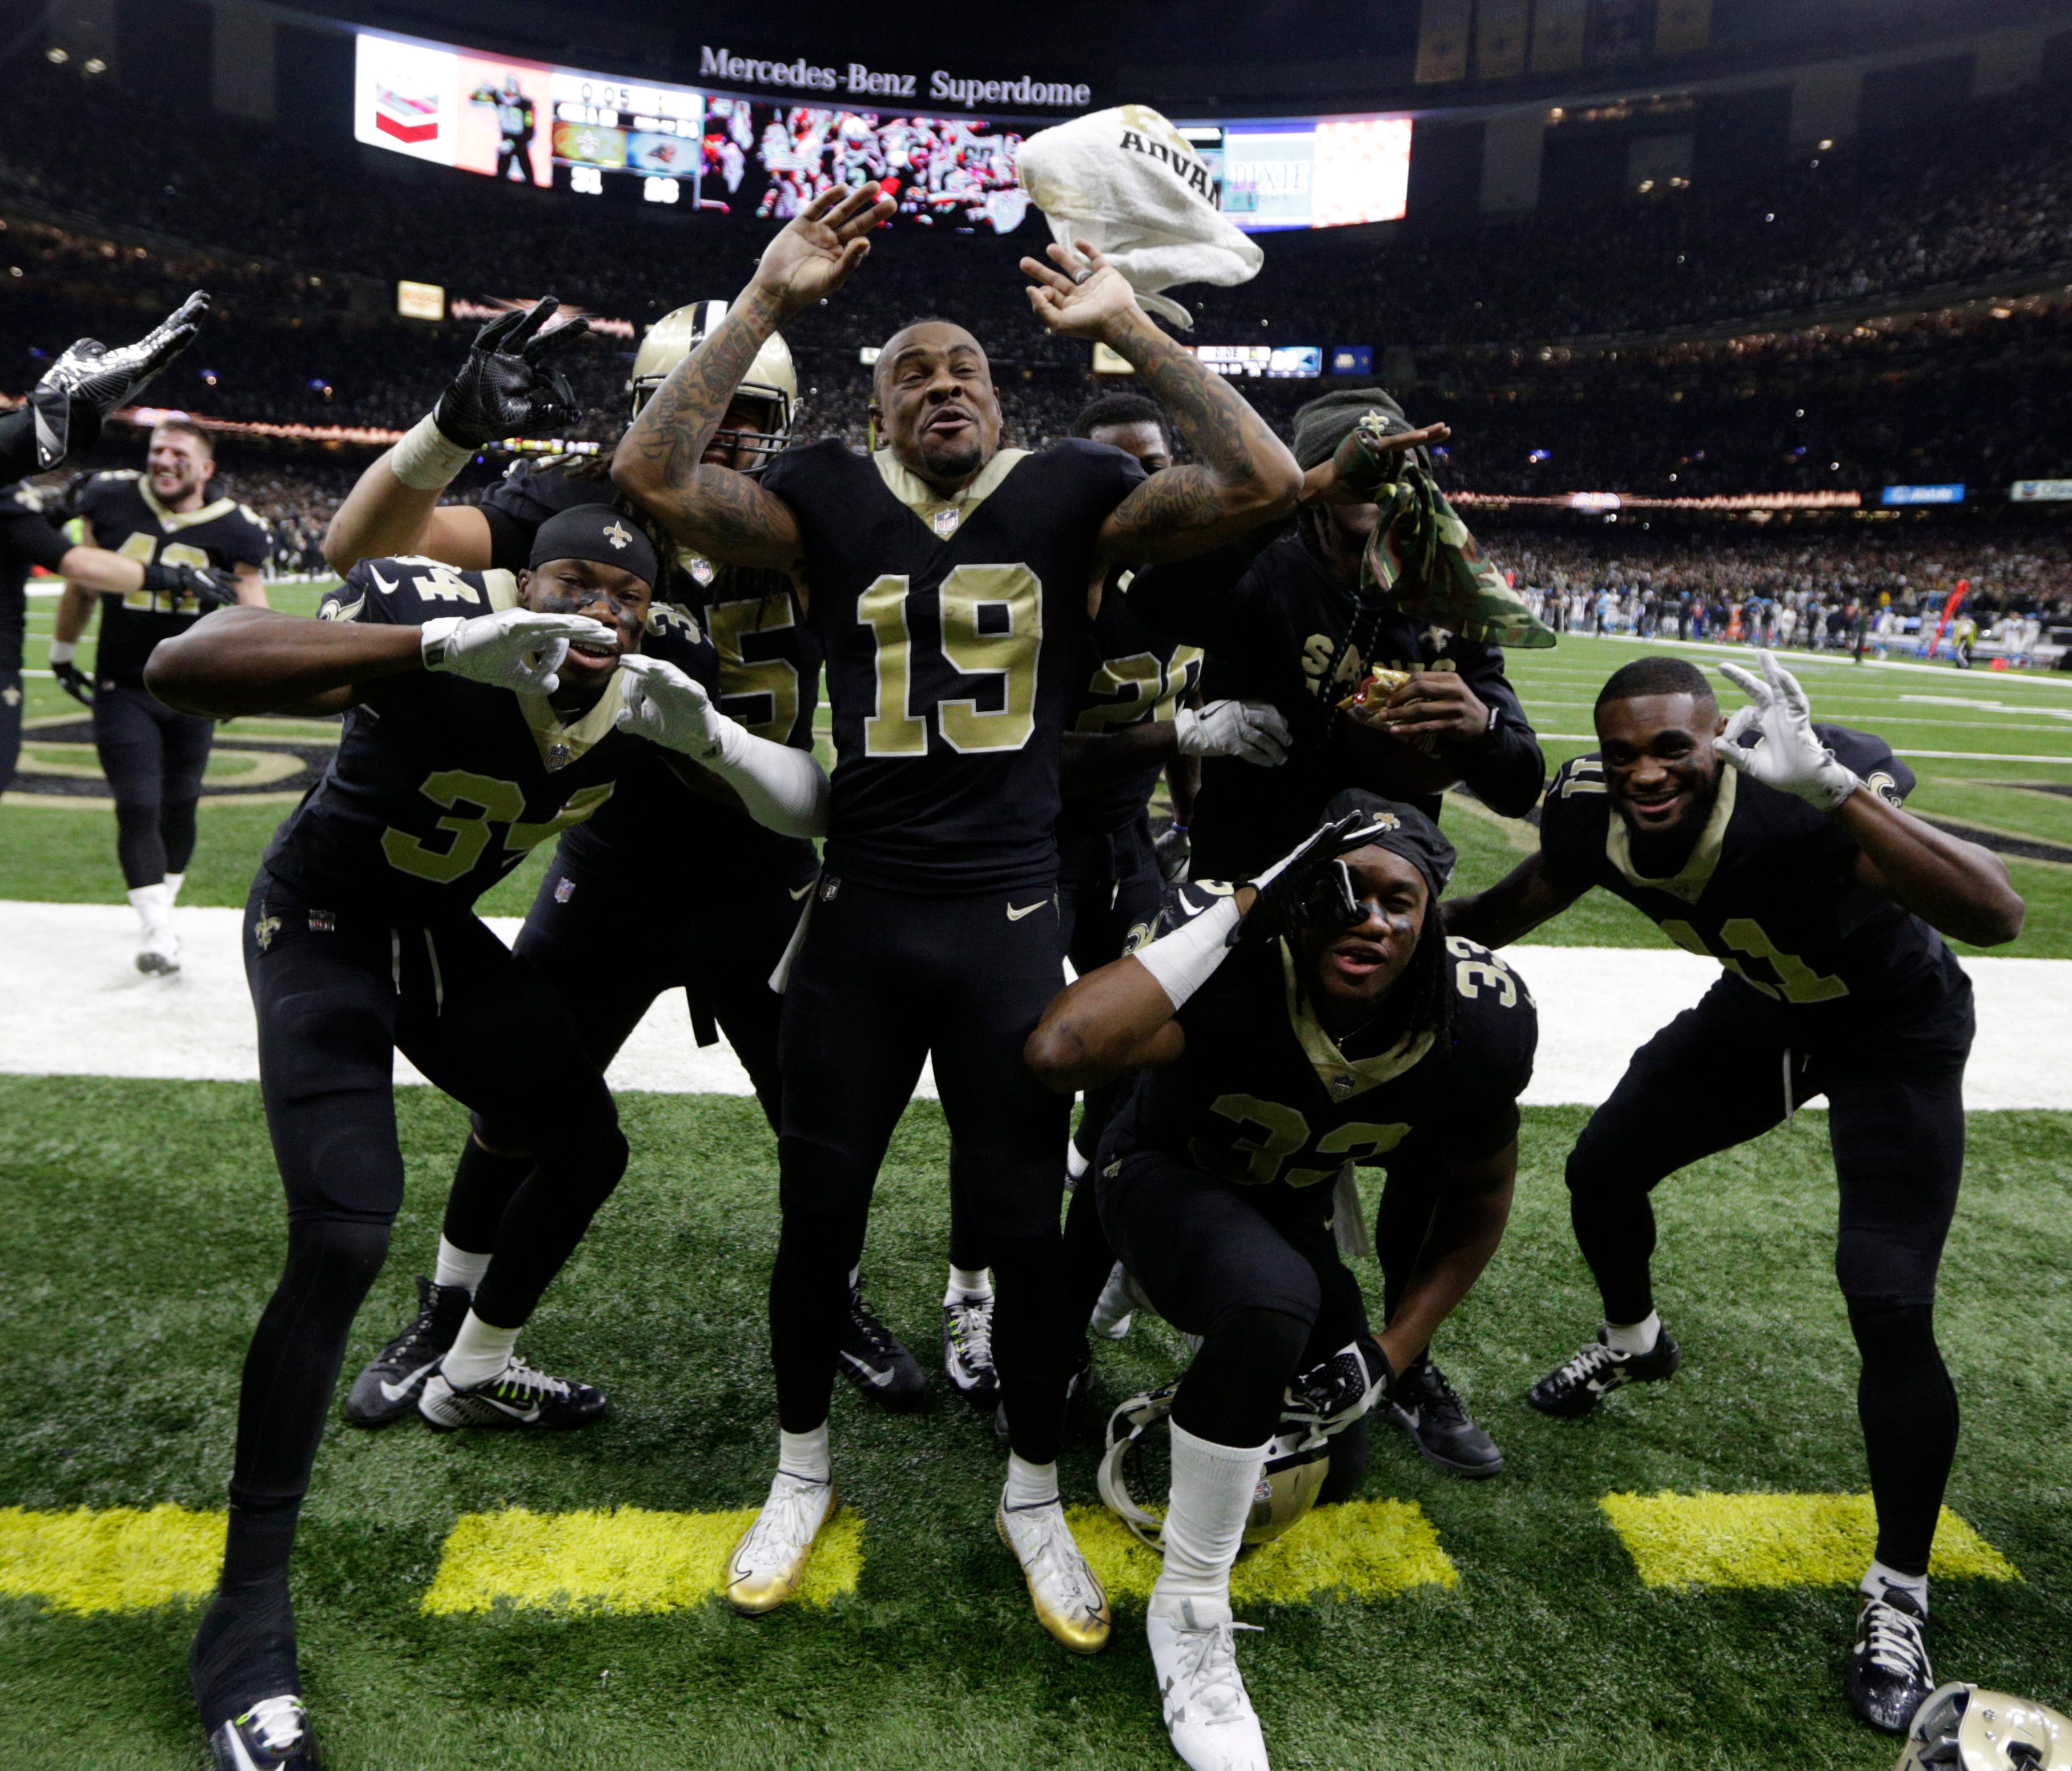 New Orleans Saints wide receiver Ted Ginn (19) and teammates react after defeating the Carolina Panthers in the NFC Wild Card playoff football game at Mercedes-Benz Superdome.